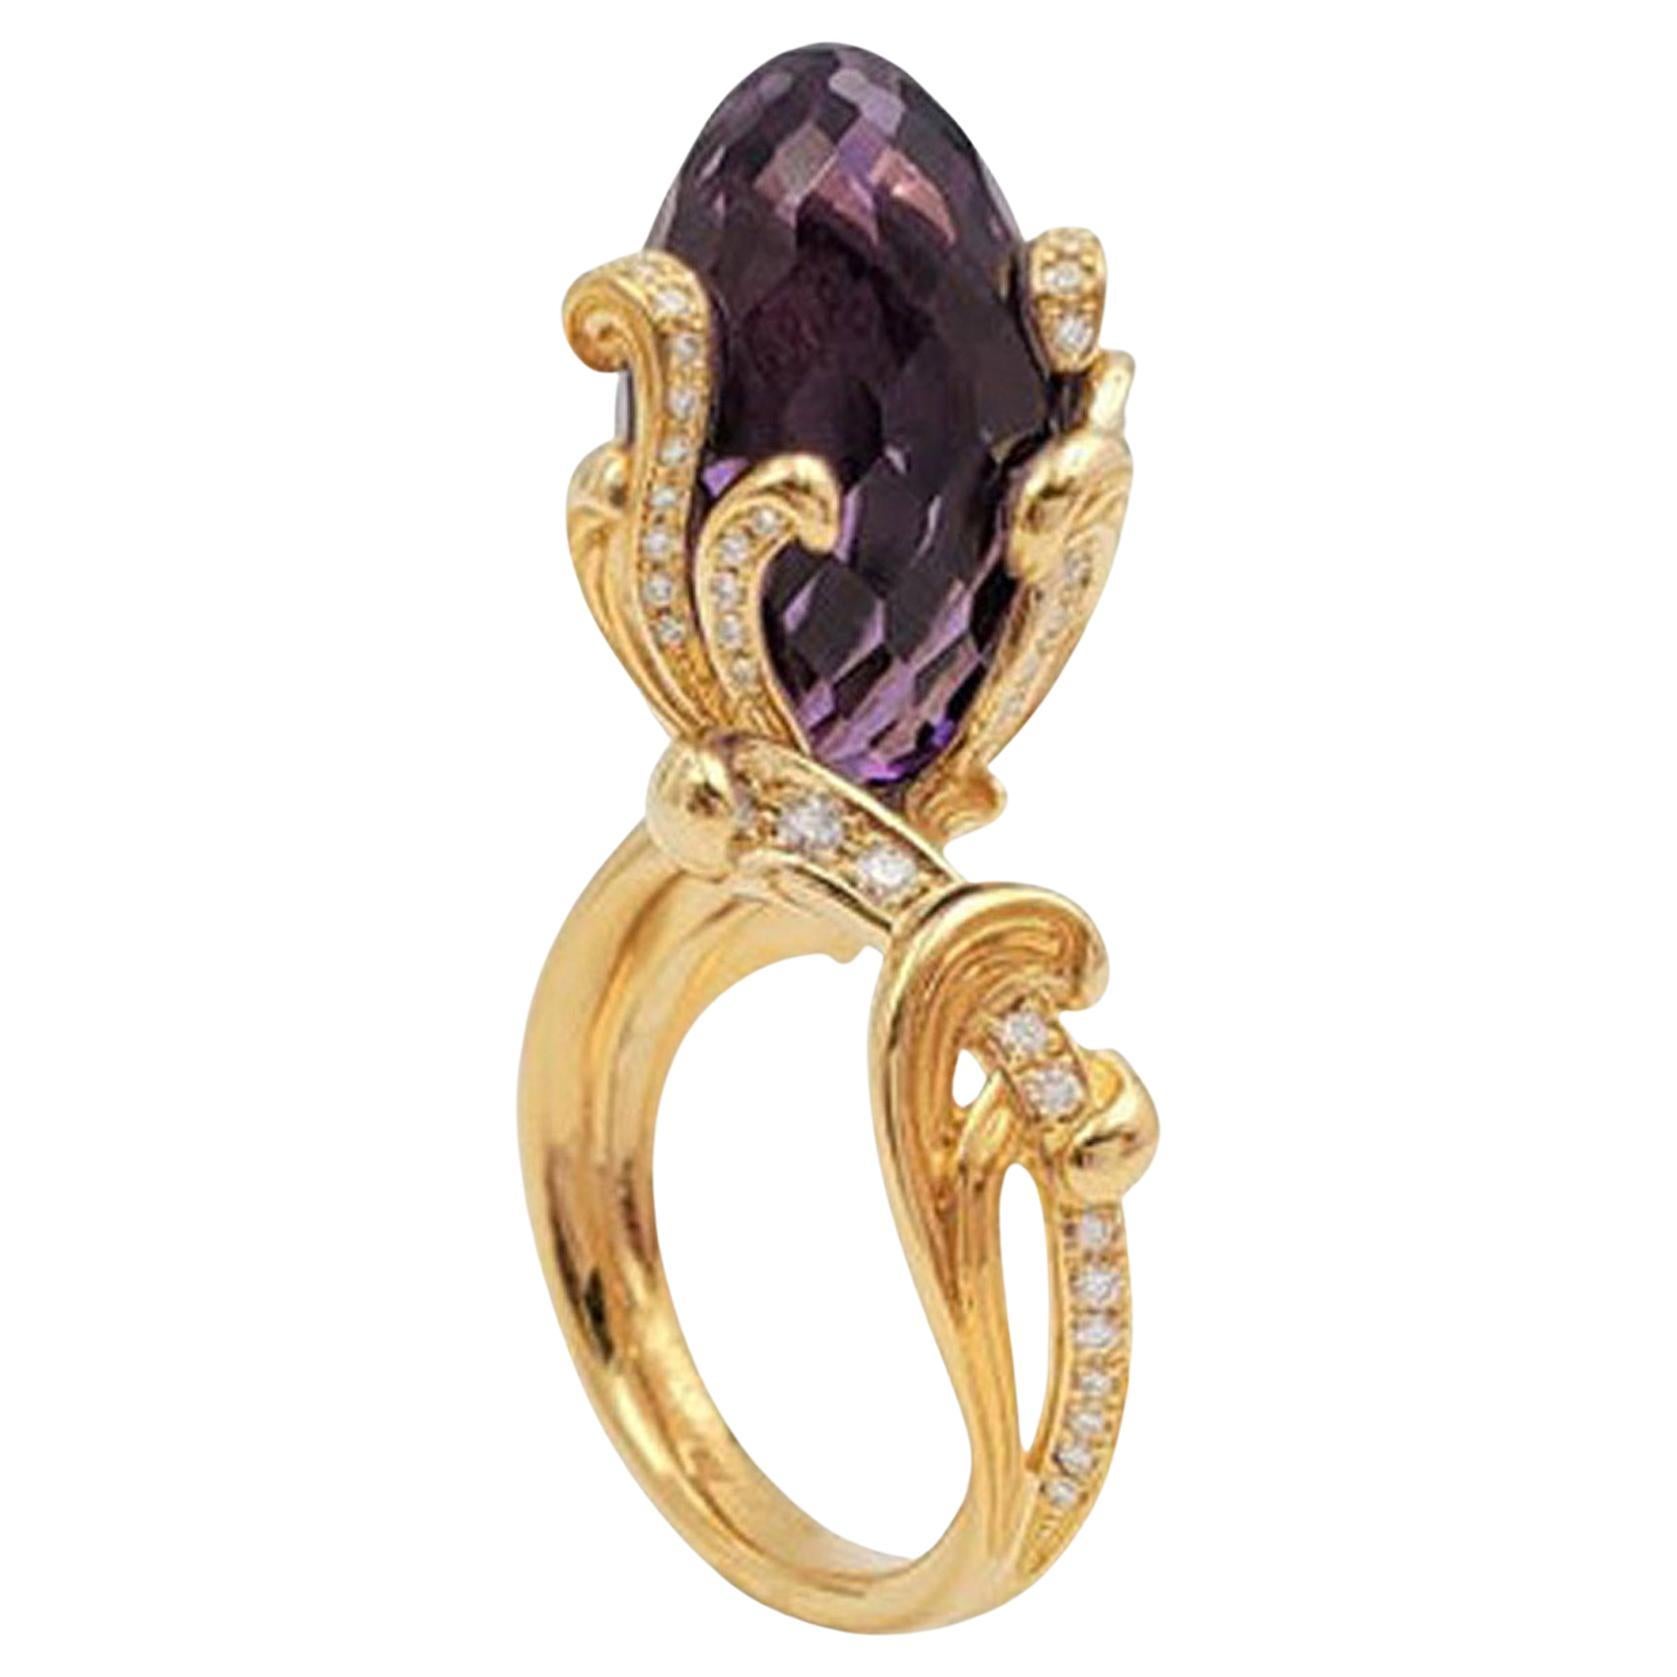 A stunning authentic avant-garde design by Carrera y Carrera from the Origin Collection. This unique and precious ring is crafted from 18k yellow gold featuring a vibrant ellipse-shape briolette cut amethyst gemstone set like a flower bud set inside